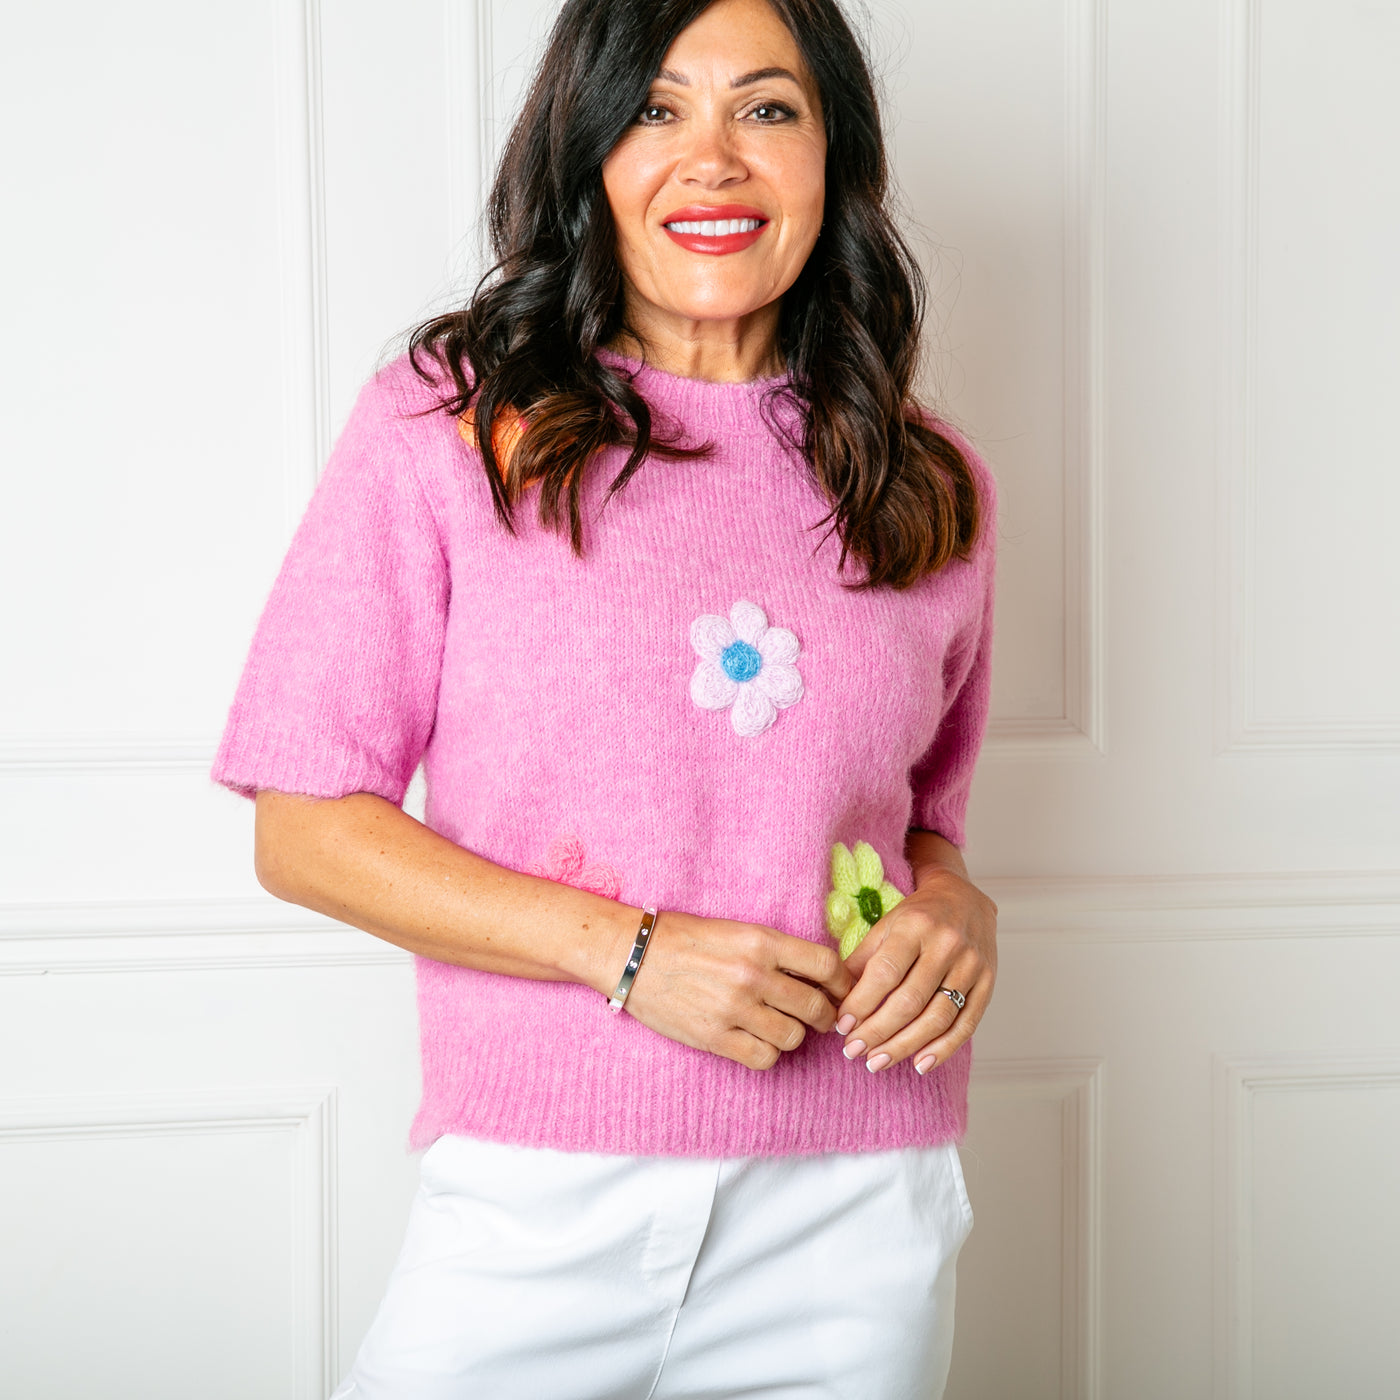 The baby pink Short Sleeve Daisy Jumper made from a blend of cotton and acrylic and perfect for spring